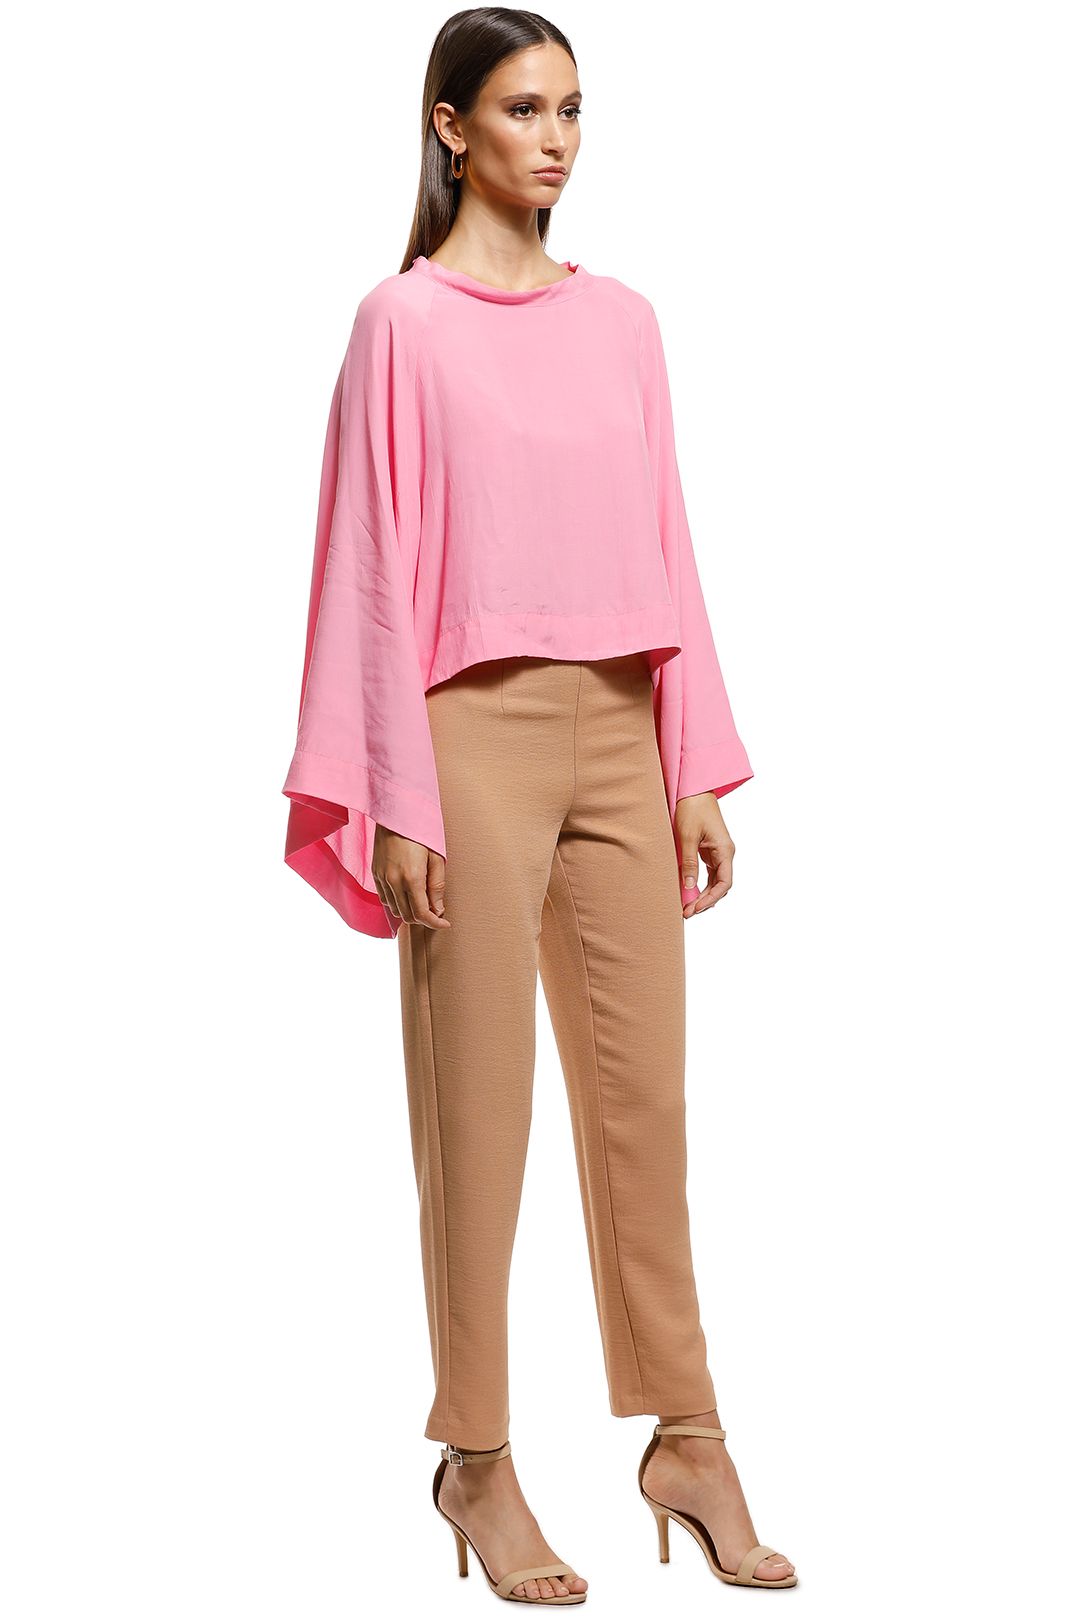 S/W/F - Flick Top - Pink - Front